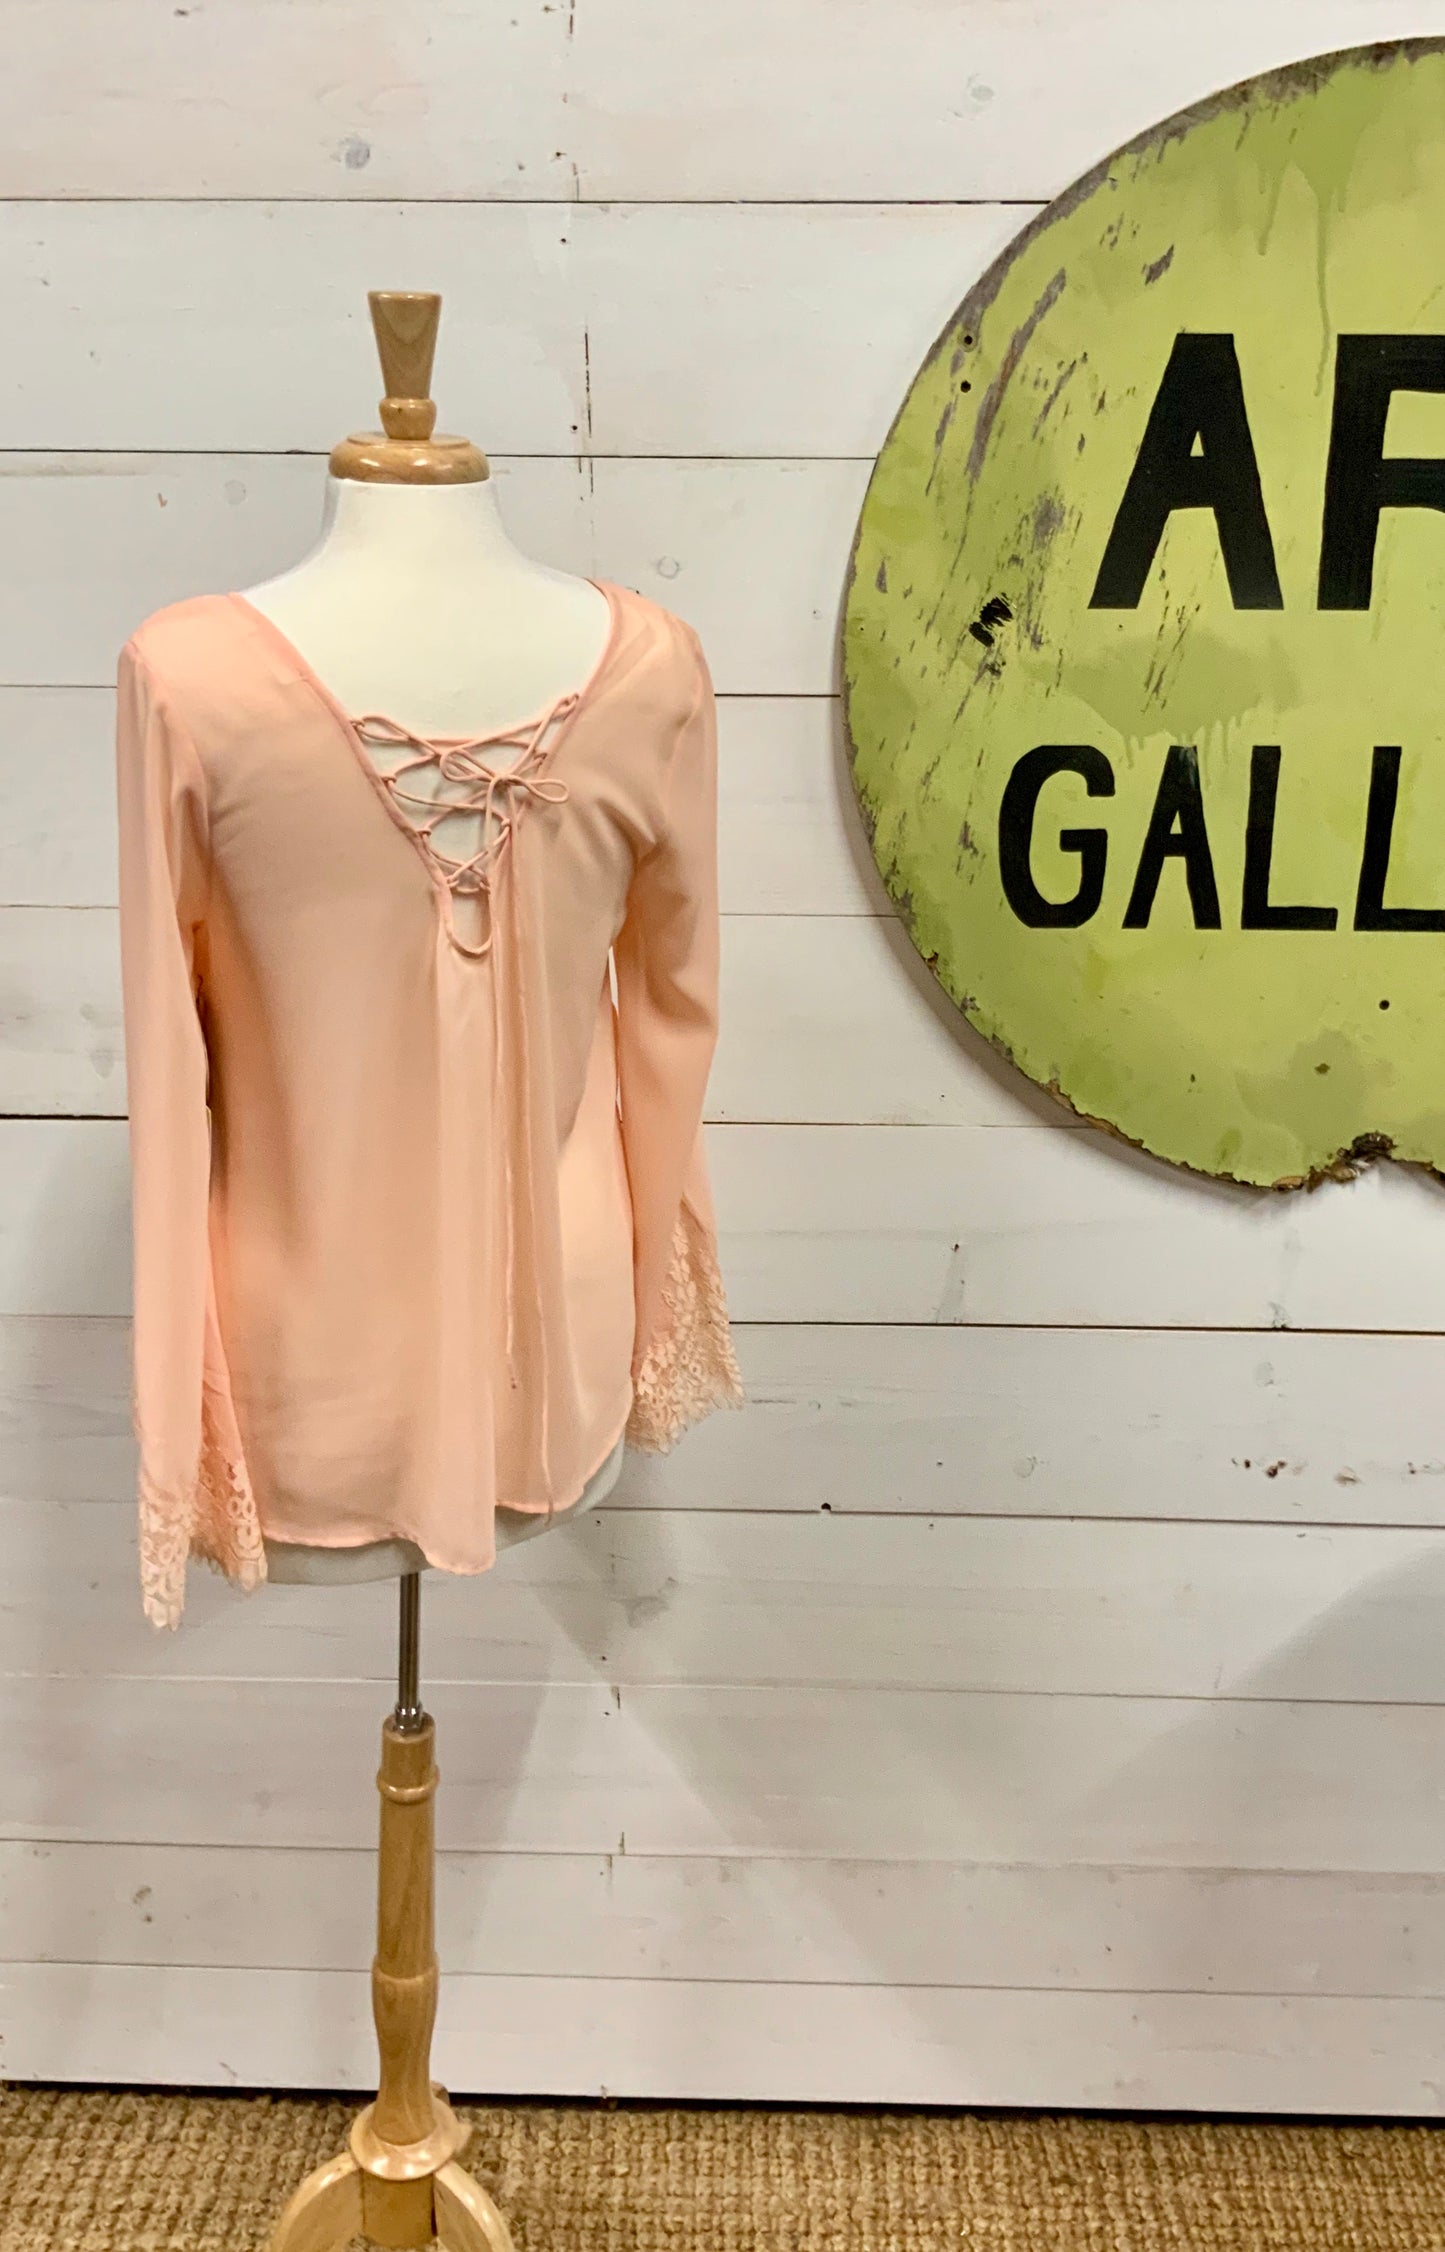 Sweet Pink Lace Top - The Desert Paintbrush